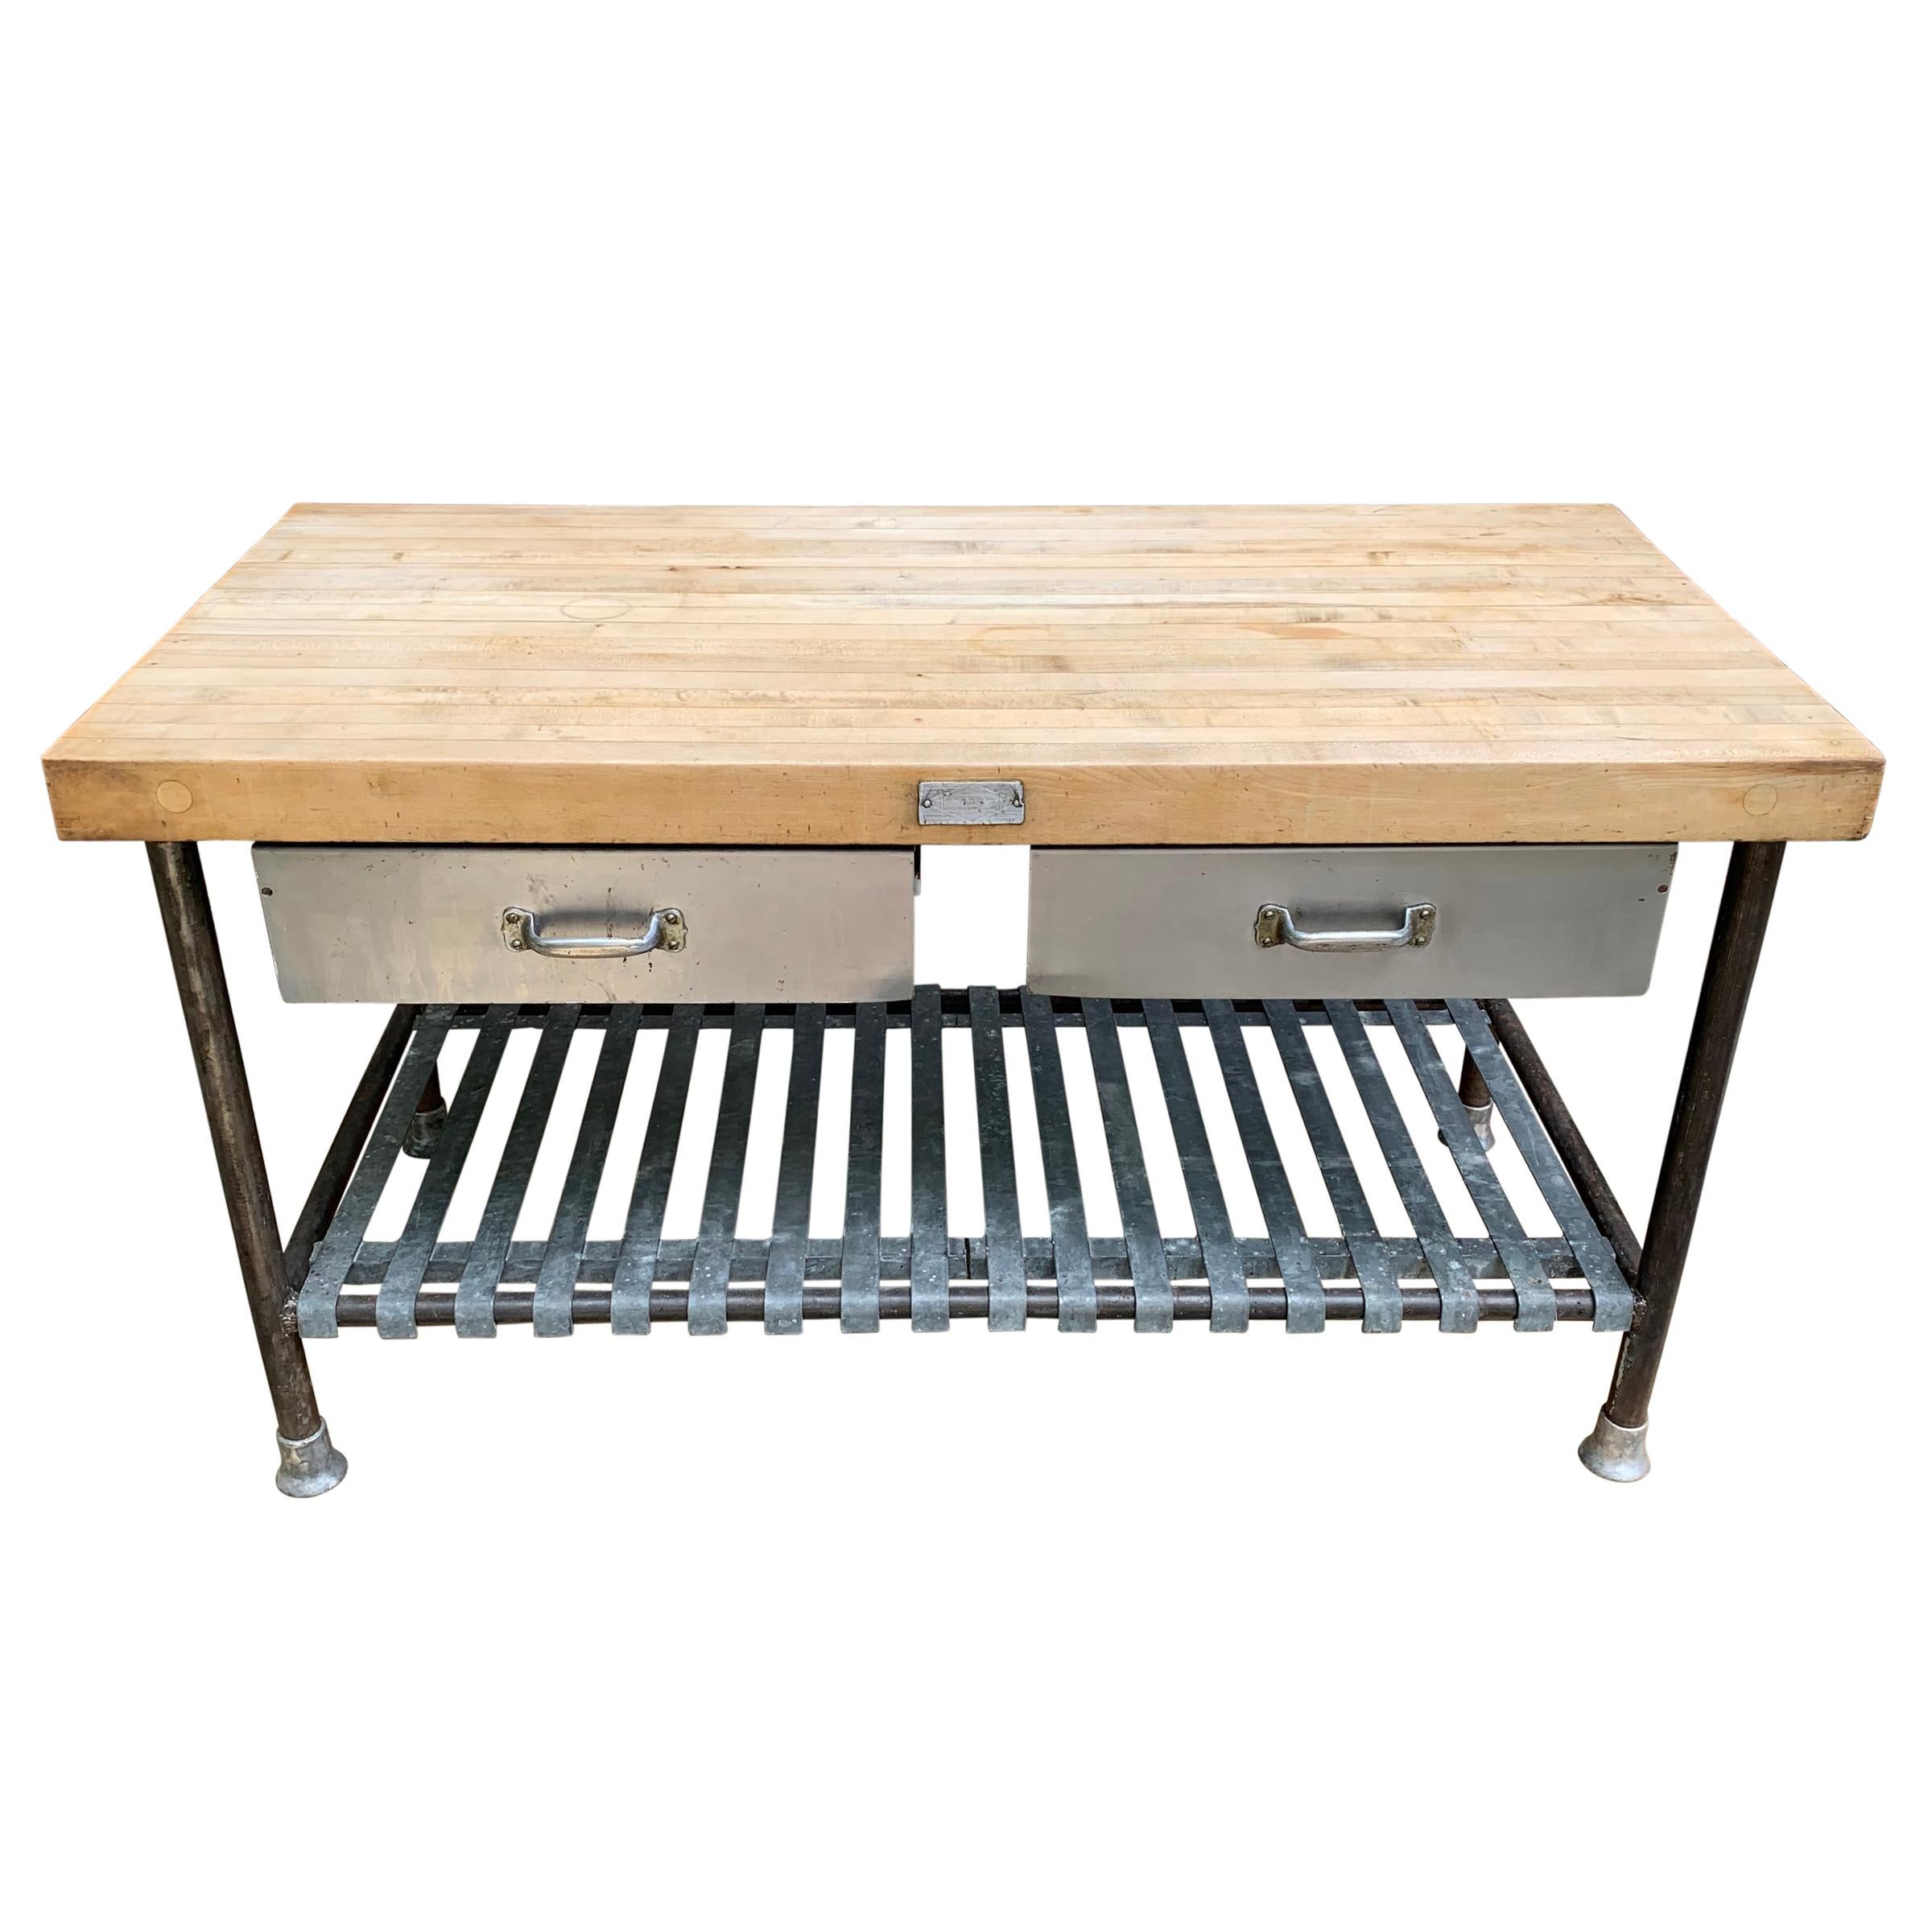 A fantastic mid-20th century American industrial table with a three inch thick maple butcher block top set on iron legs with removable galvanized steel slatted shelves and two drawers that can be locked in needed. This would make the most perfect